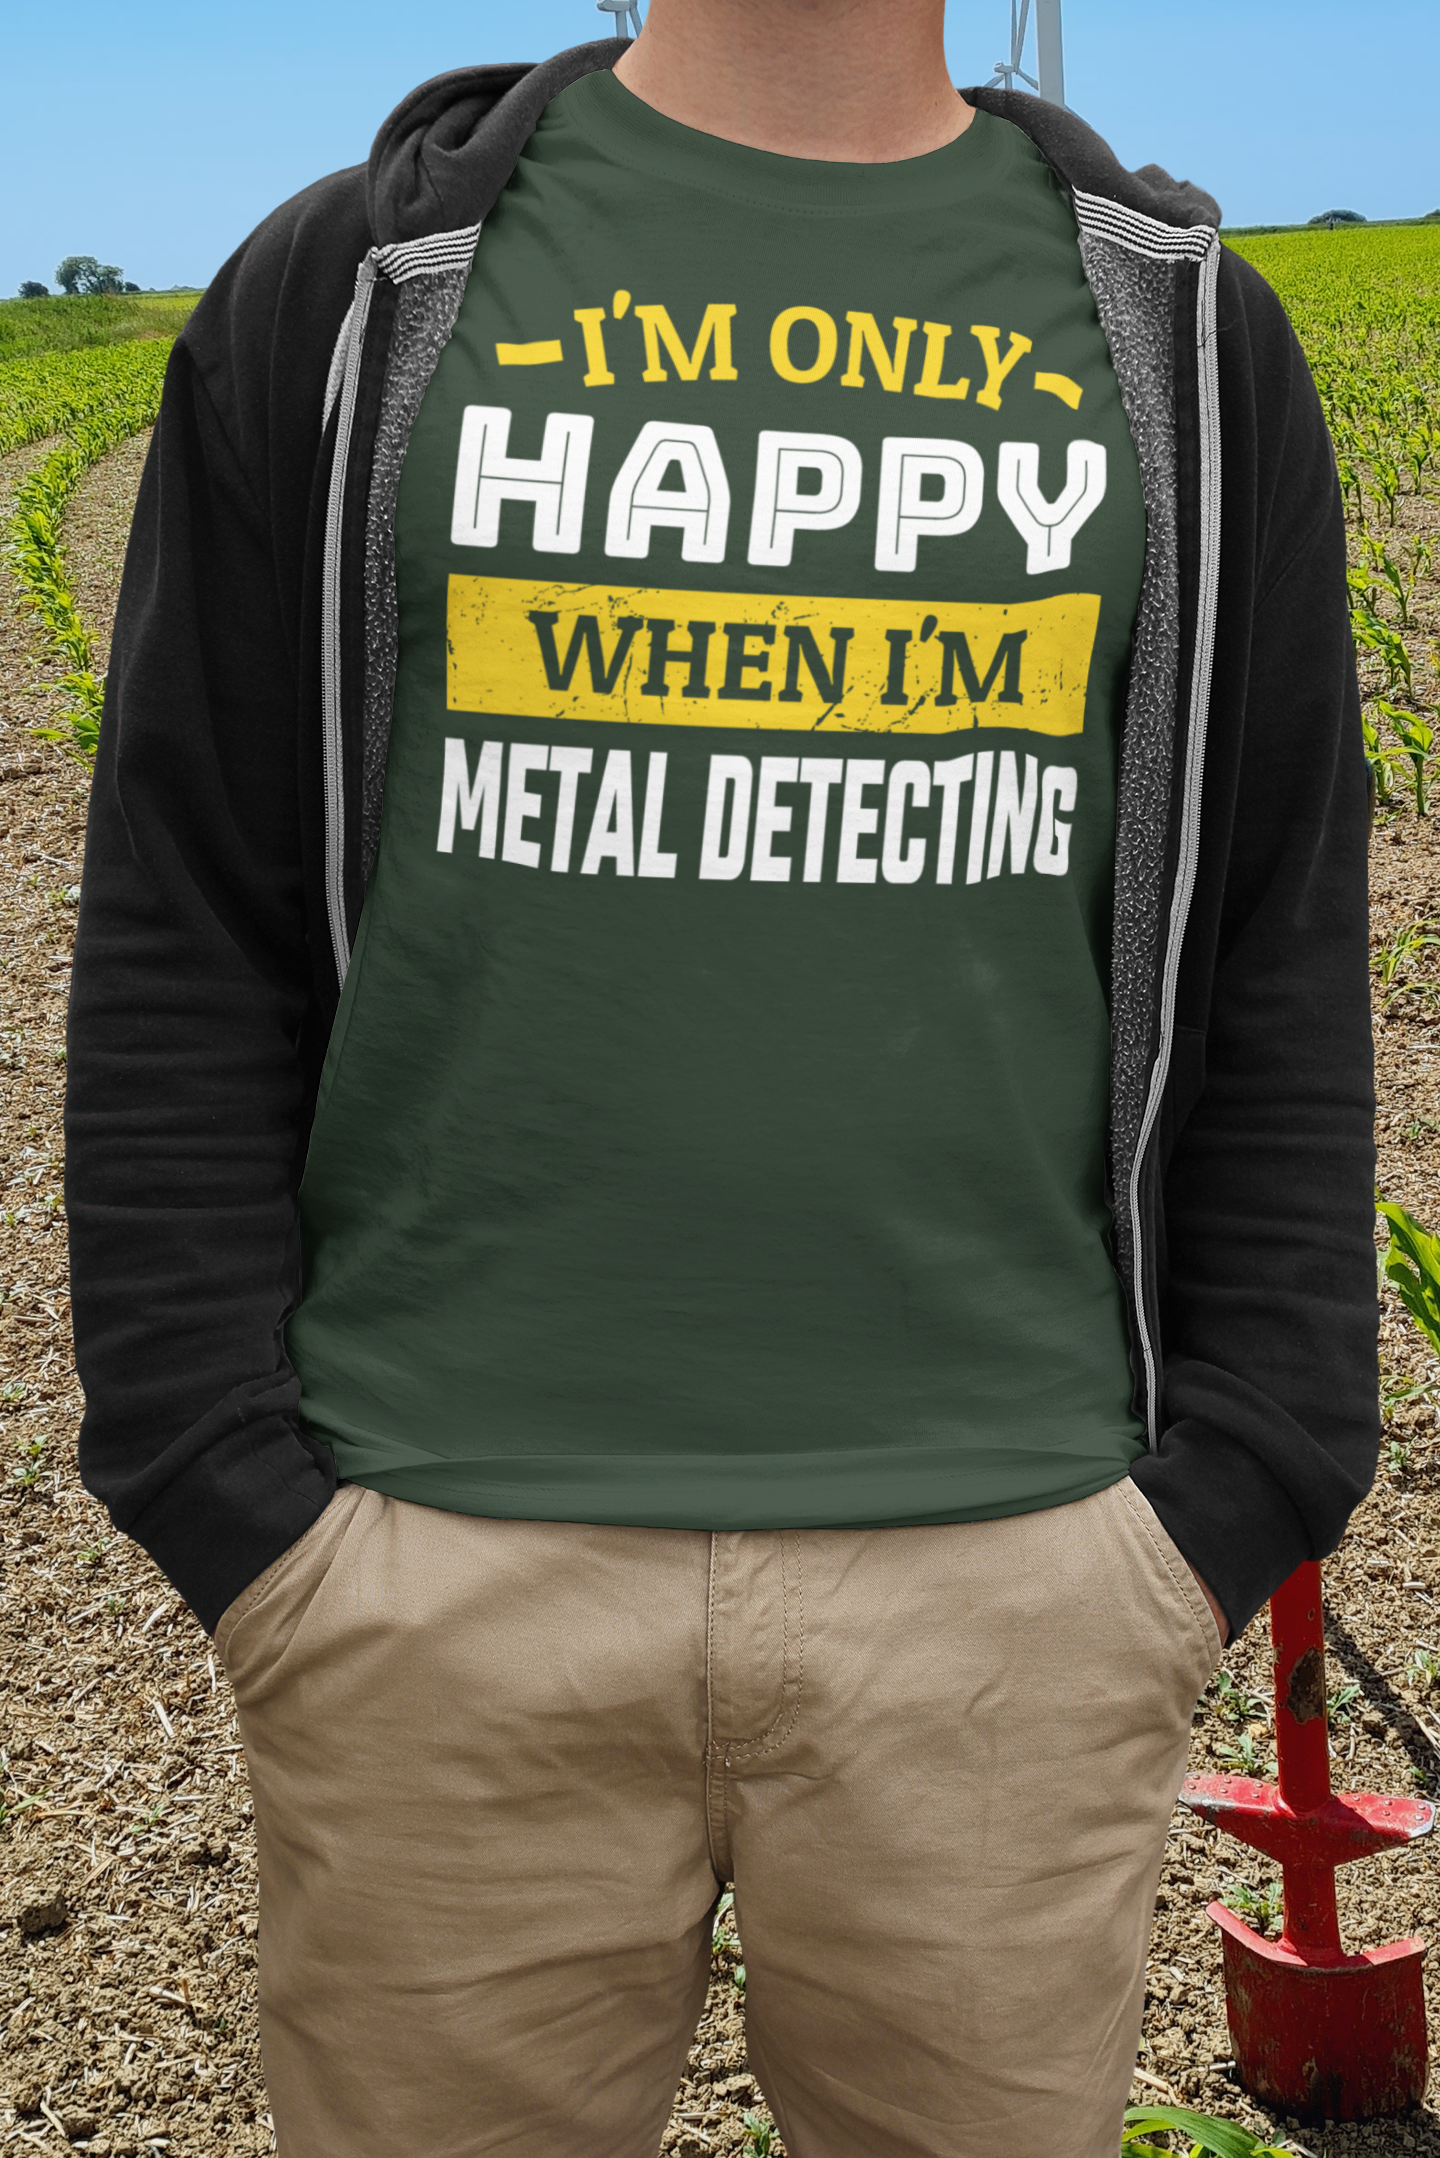 I'm only happy when I'm metal detecting T-shirt